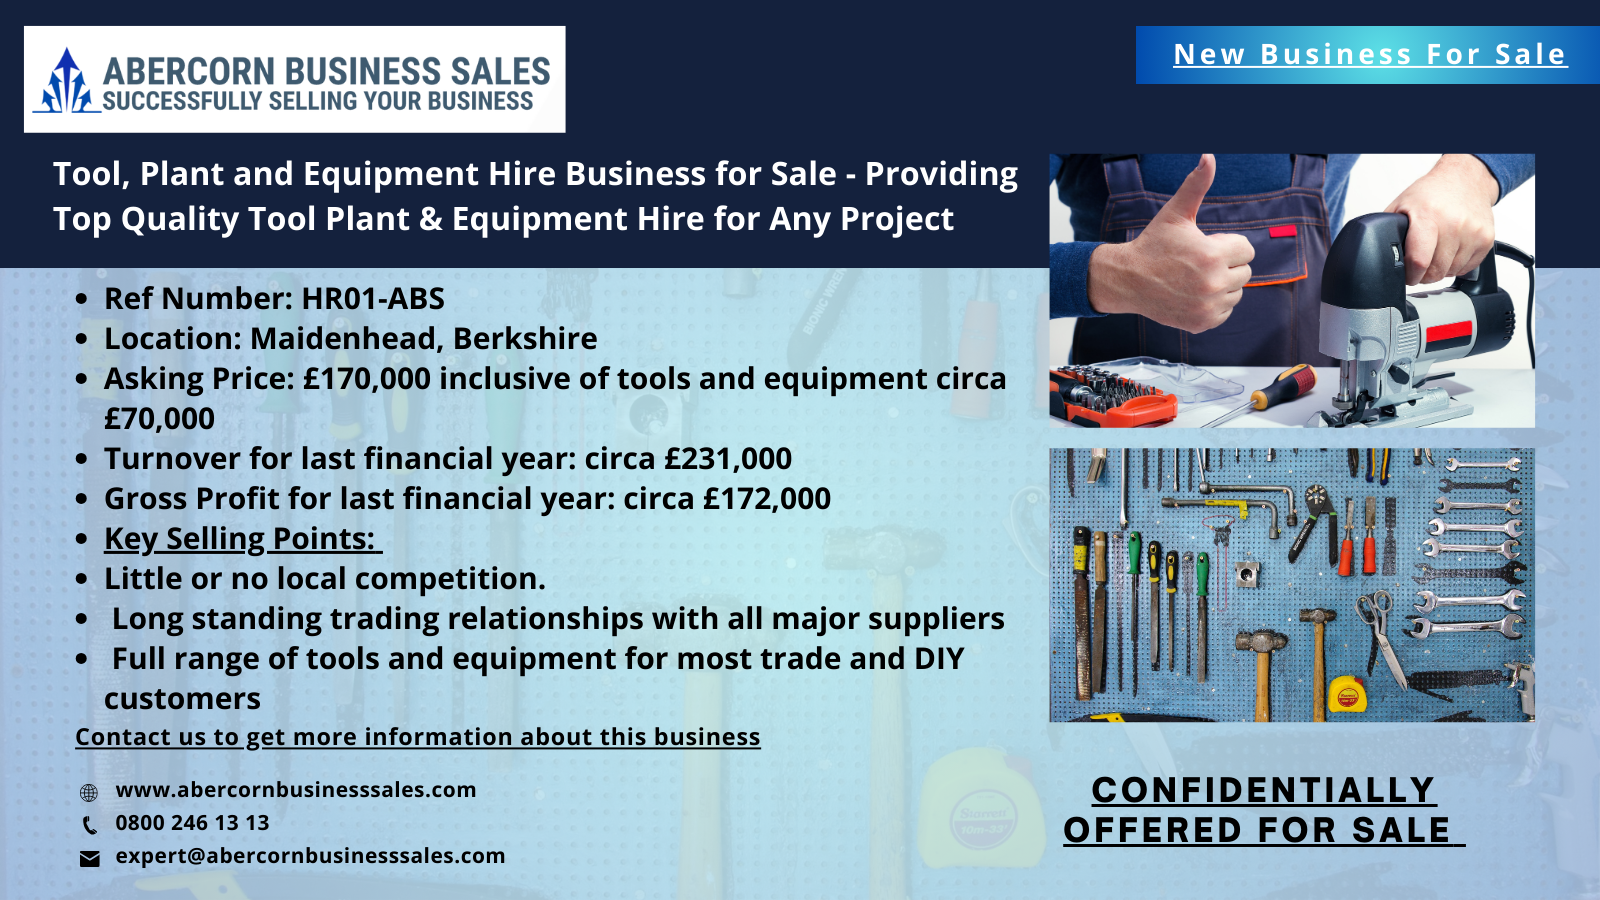 HR01-ABS - Tool, Plant and Equipment Hire Business for Sale - Providing Top Quality Tool Plant & Equipment Hire for Any Project